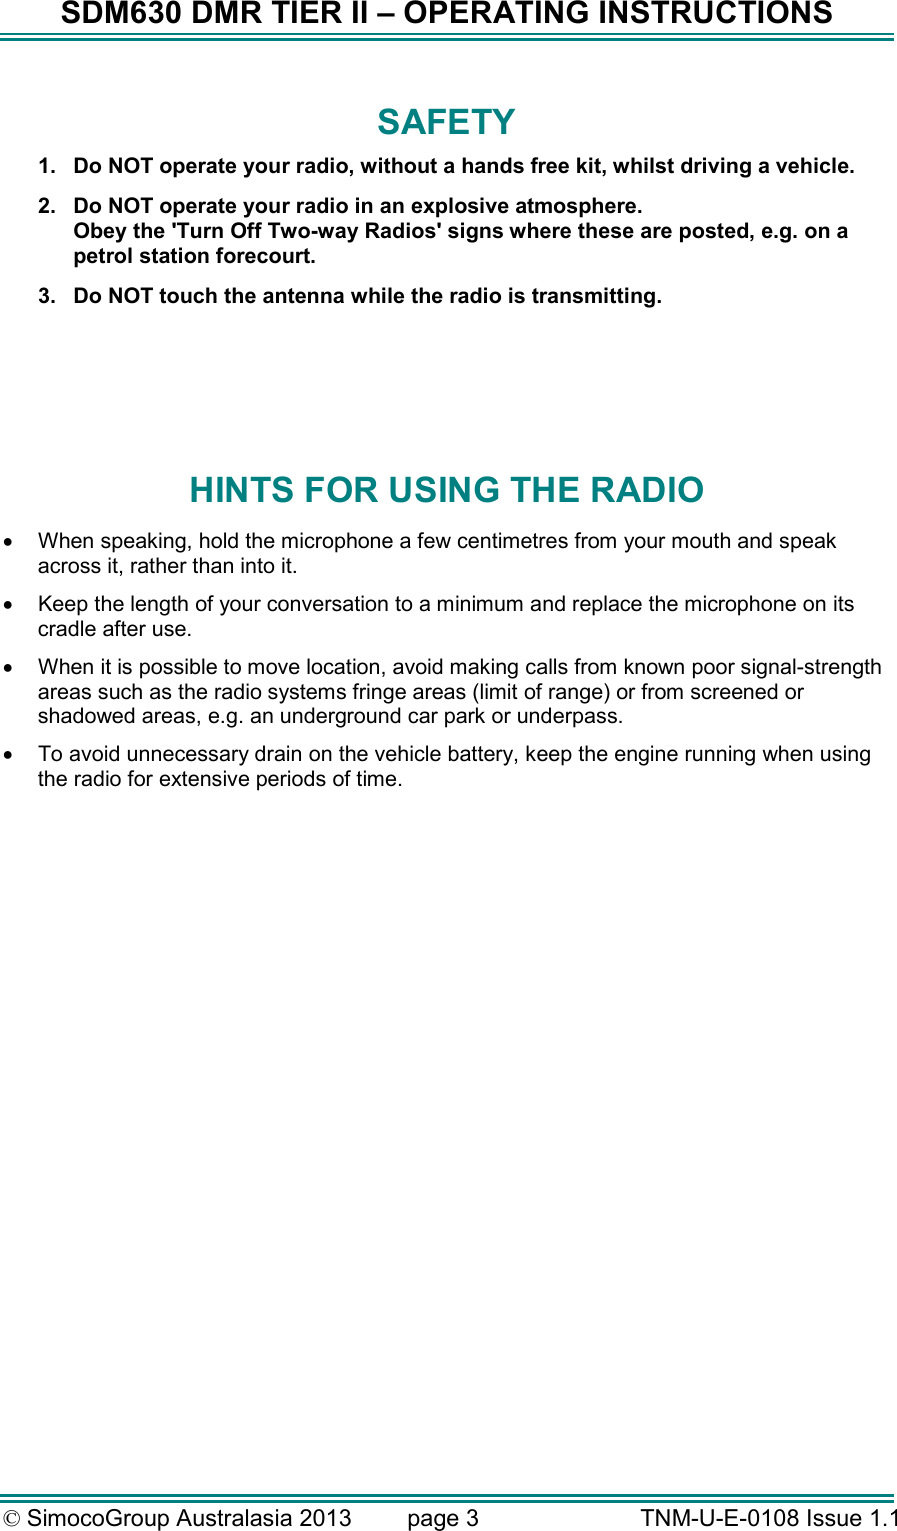 SDM630 DMR TIER II – OPERATING INSTRUCTIONS © SimocoGroup Australasia 2013   page 3   TNM-U-E-0108 Issue 1.1 SAFETY 1.  Do NOT operate your radio, without a hands free kit, whilst driving a vehicle.   2.  Do NOT operate your radio in an explosive atmosphere. Obey the &apos;Turn Off Two-way Radios&apos; signs where these are posted, e.g. on a petrol station forecourt. 3.  Do NOT touch the antenna while the radio is transmitting.    HINTS FOR USING THE RADIO •  When speaking, hold the microphone a few centimetres from your mouth and speak across it, rather than into it. •  Keep the length of your conversation to a minimum and replace the microphone on its cradle after use. •  When it is possible to move location, avoid making calls from known poor signal-strength areas such as the radio systems fringe areas (limit of range) or from screened or shadowed areas, e.g. an underground car park or underpass. •  To avoid unnecessary drain on the vehicle battery, keep the engine running when using the radio for extensive periods of time.  